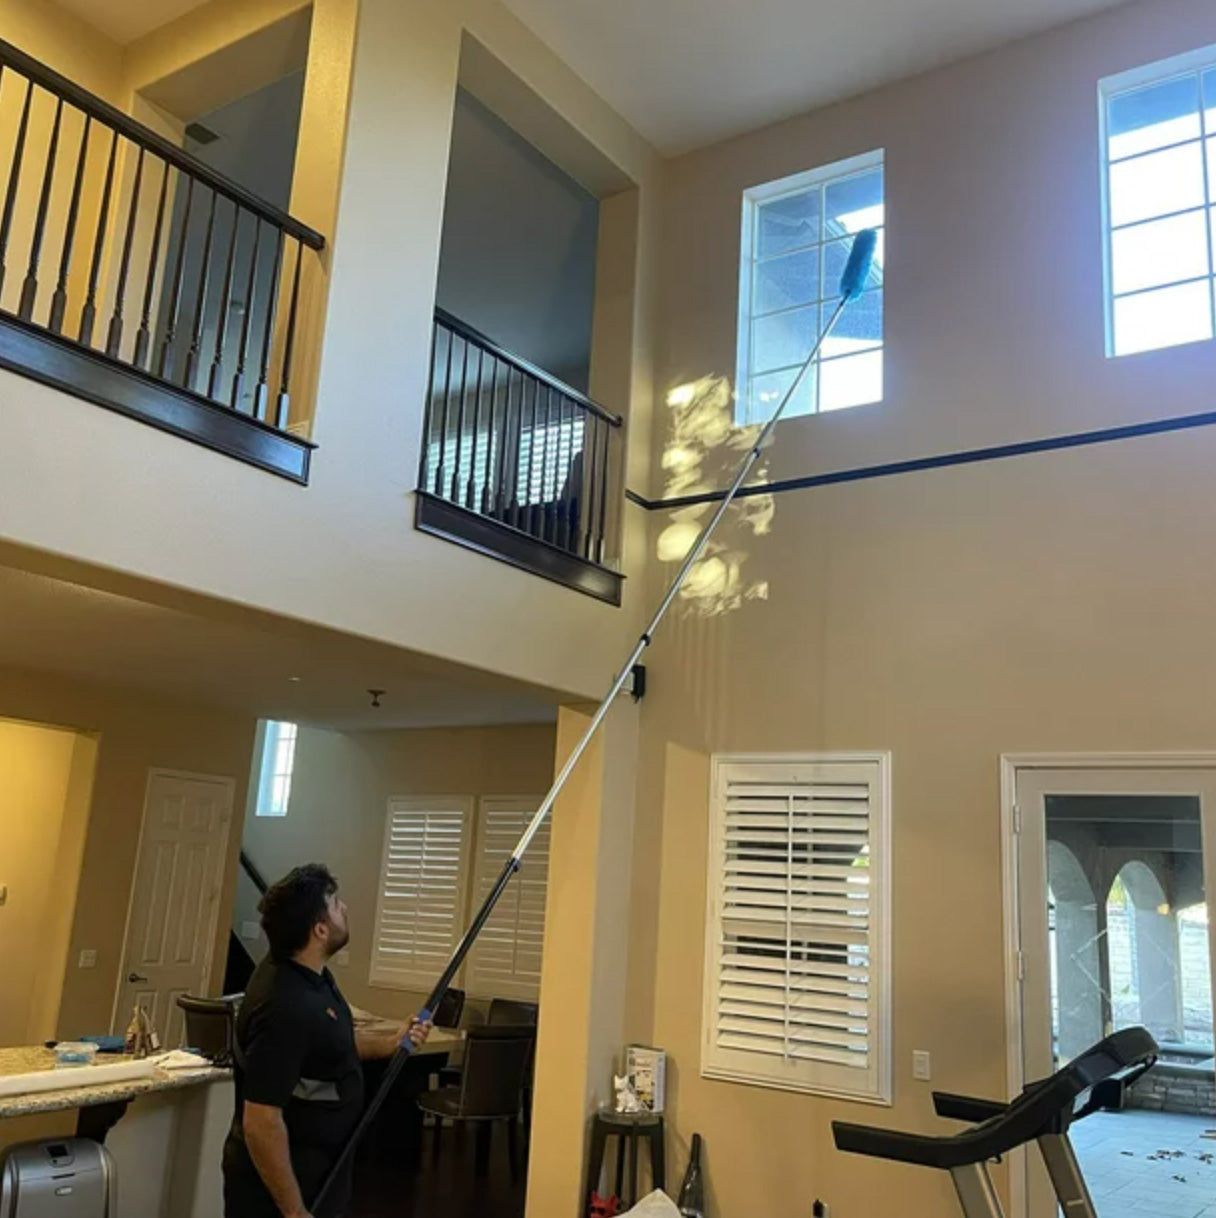 20 Foot High Ceiling Fan Duster with 5-12 Foot Extension Pole, Extendable Reusable Cobweb, Feather, Window Cleaning Squeegee Kit